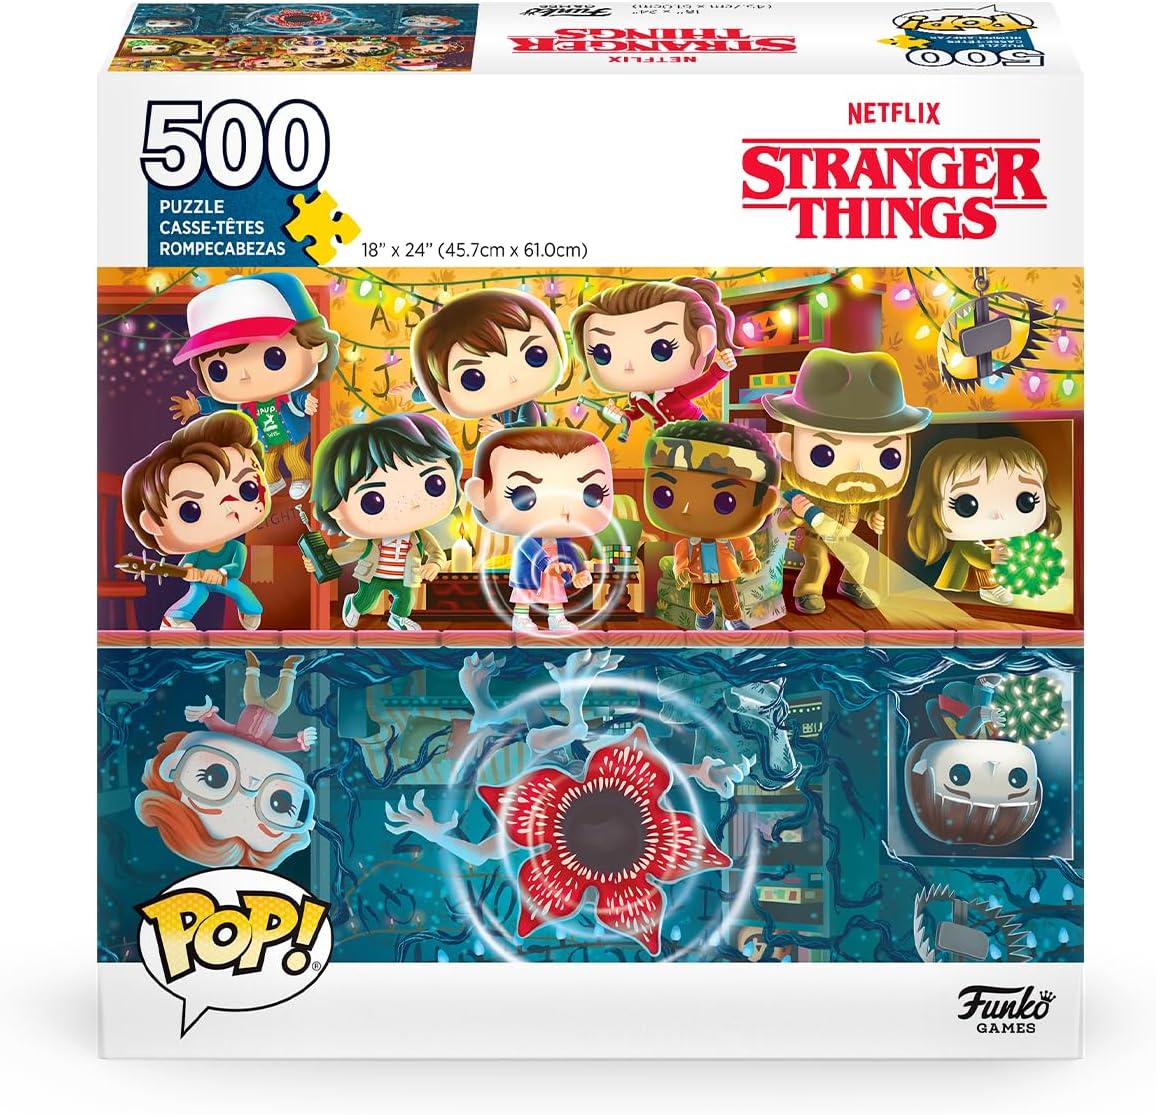 Funko POP! Puzzle - Stranger Things - Upside Down - 500 Piece Jigsaw Puzzle